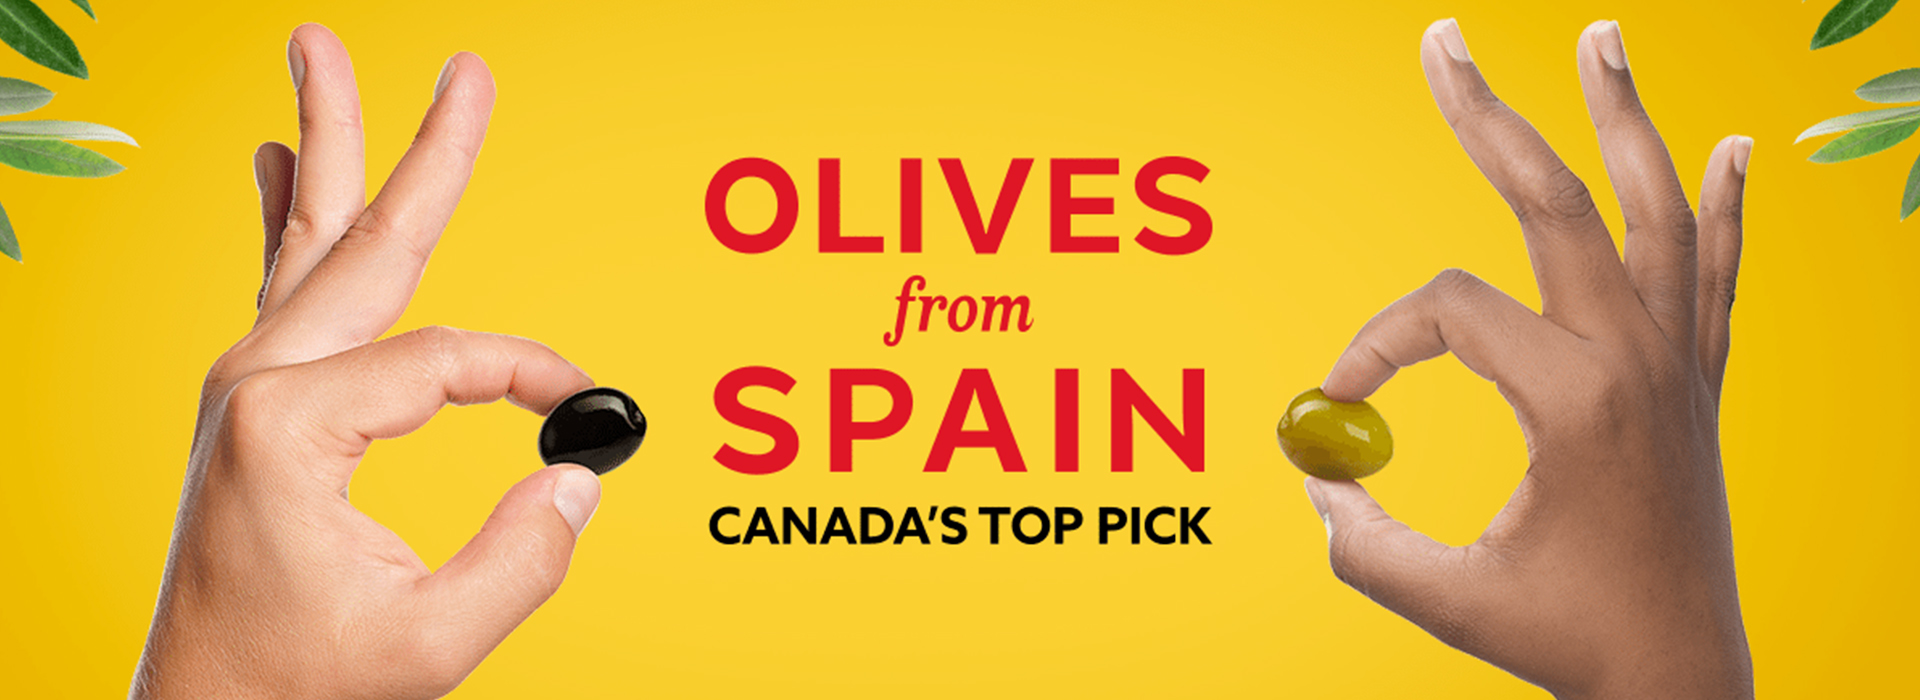 Key visual : Olives from Spain